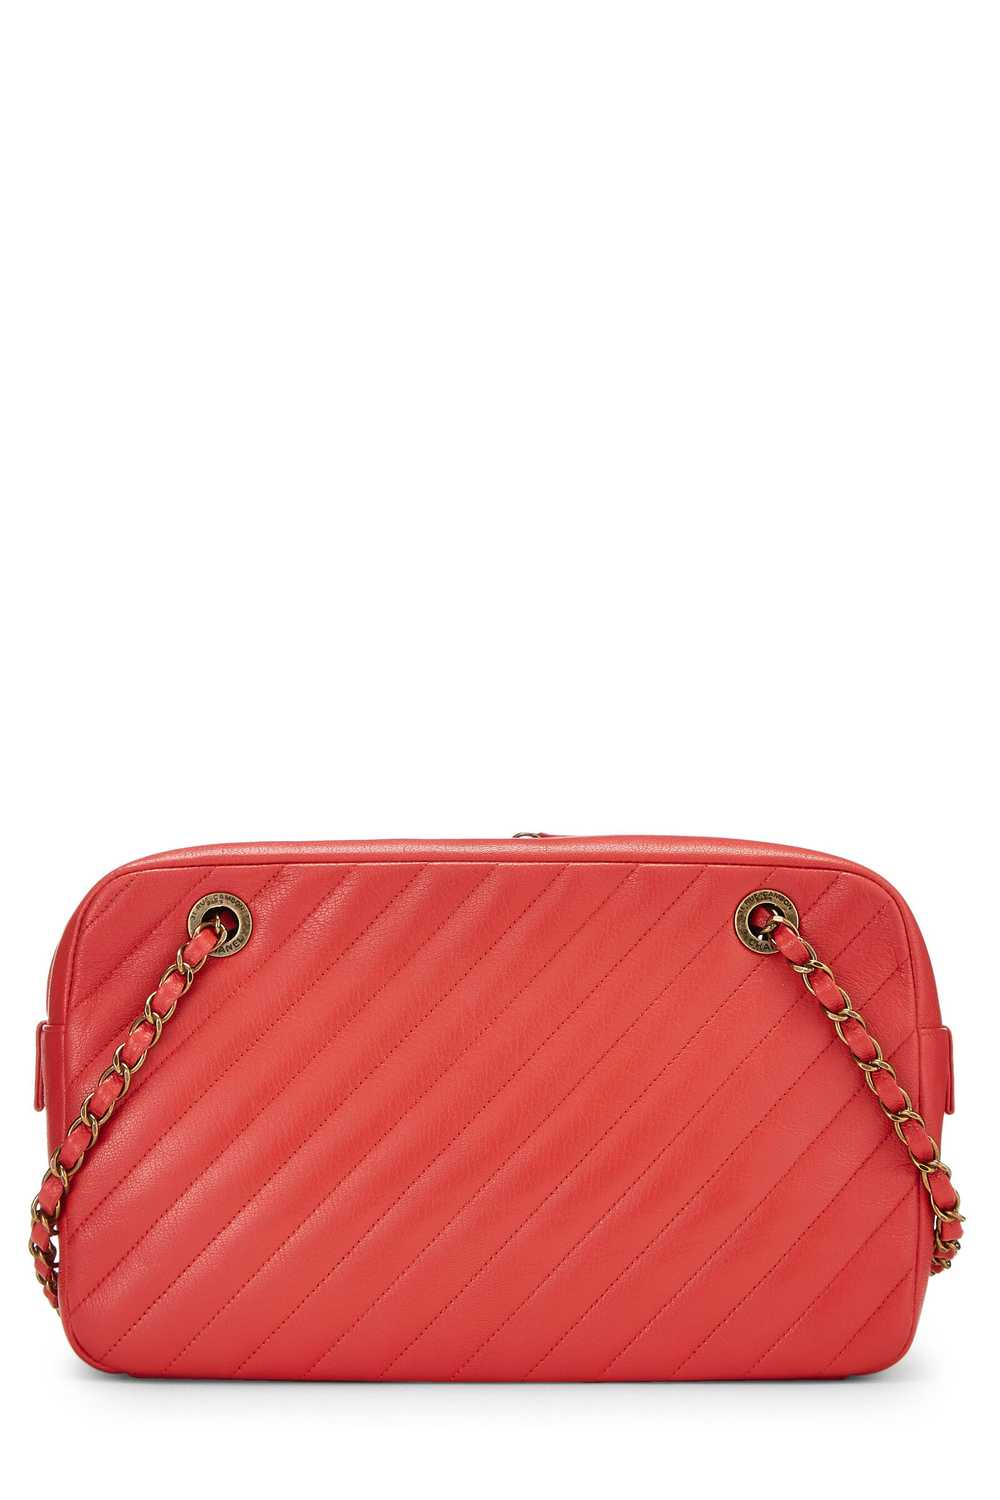 Red Quilted Lambskin Diagonal Camera Bag Large - image 6